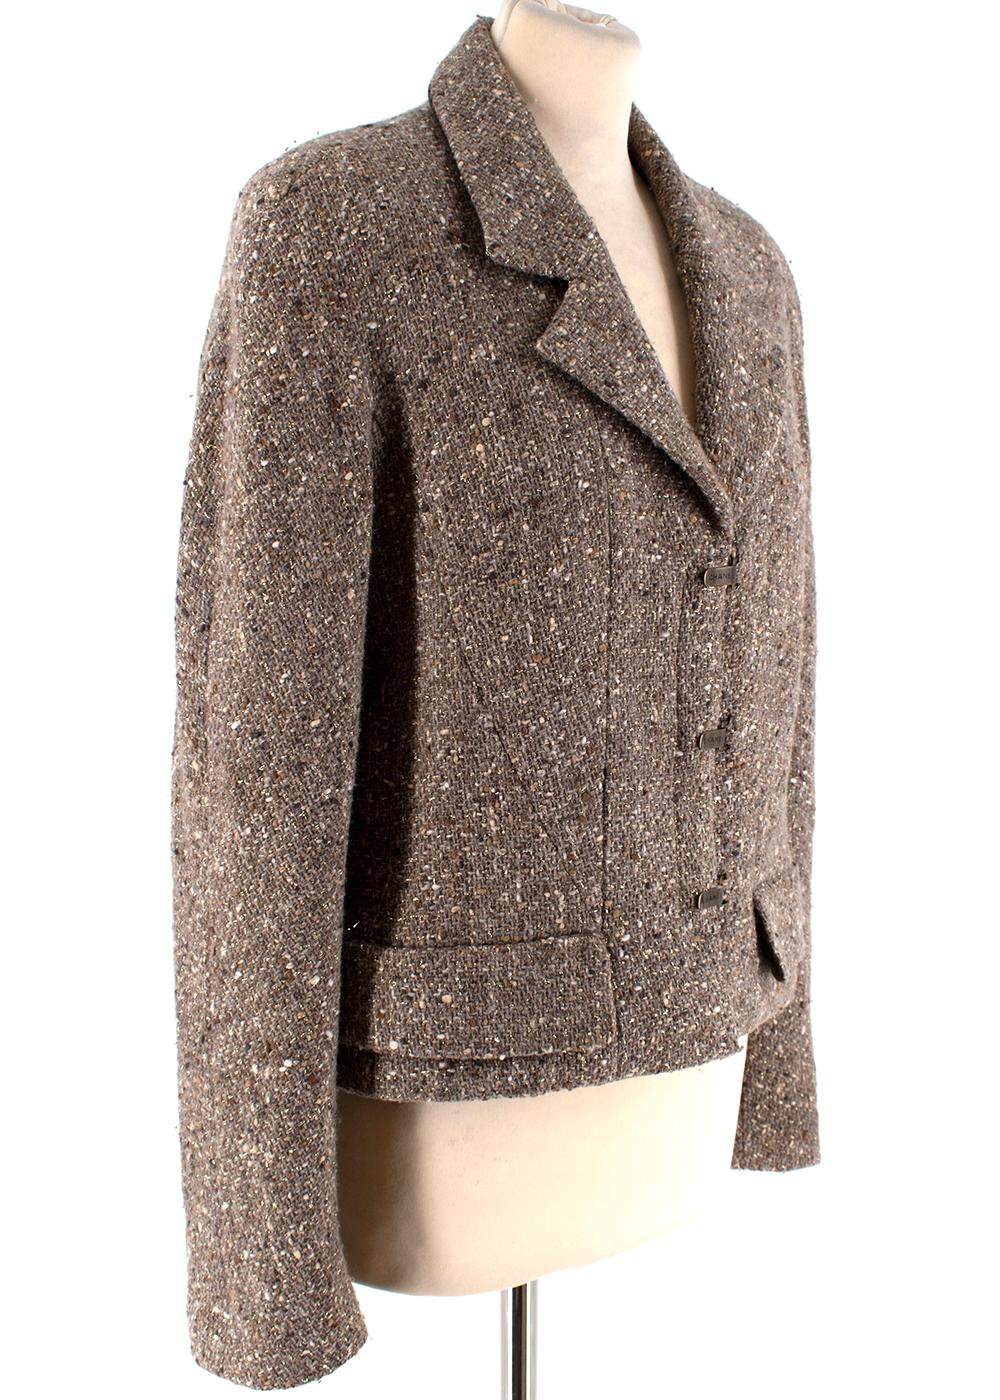 Chanel Taupe Wool Blend Tweed Jacket

-Made of a soft wool blend 
-Signature tweed texture 
-Classic cut
-Branded Clasp fastening to the front 
-CC logo branding to the lining
-Faux pocket details to the front
-Luxurious silk lining
-Chain to the